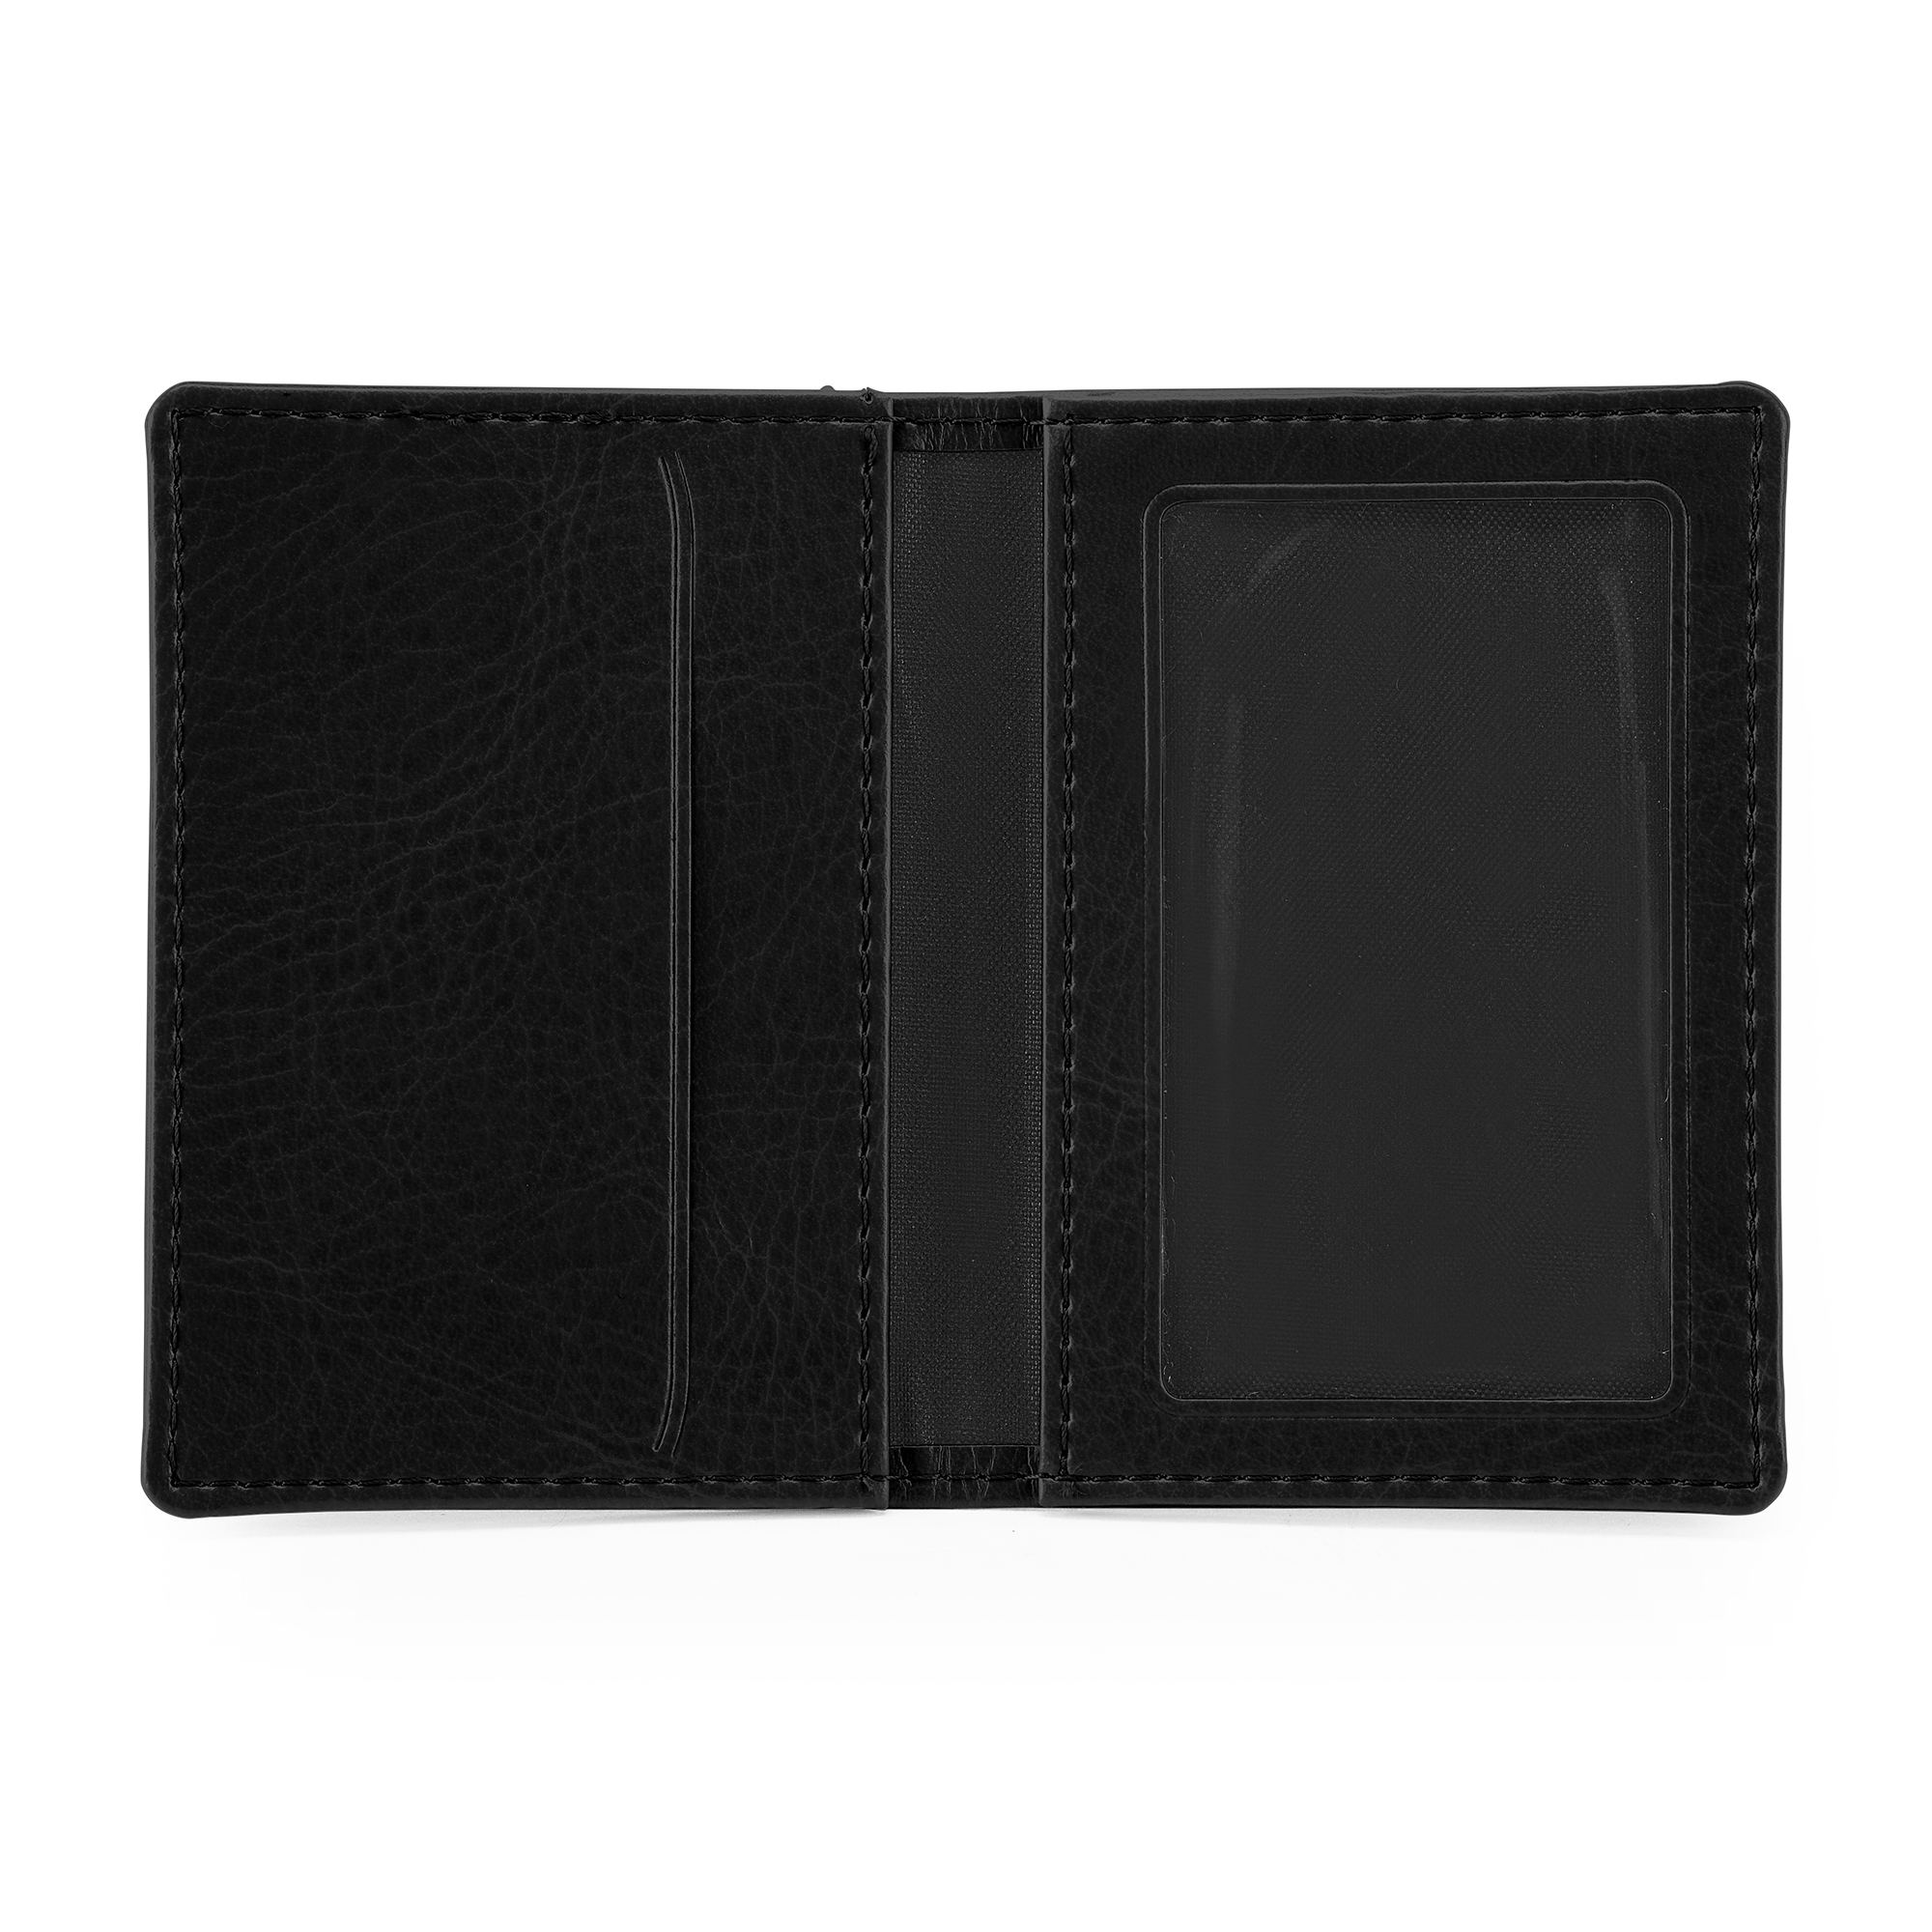 Promotional Oyster Travel Card case in a choice of Belluno Colours